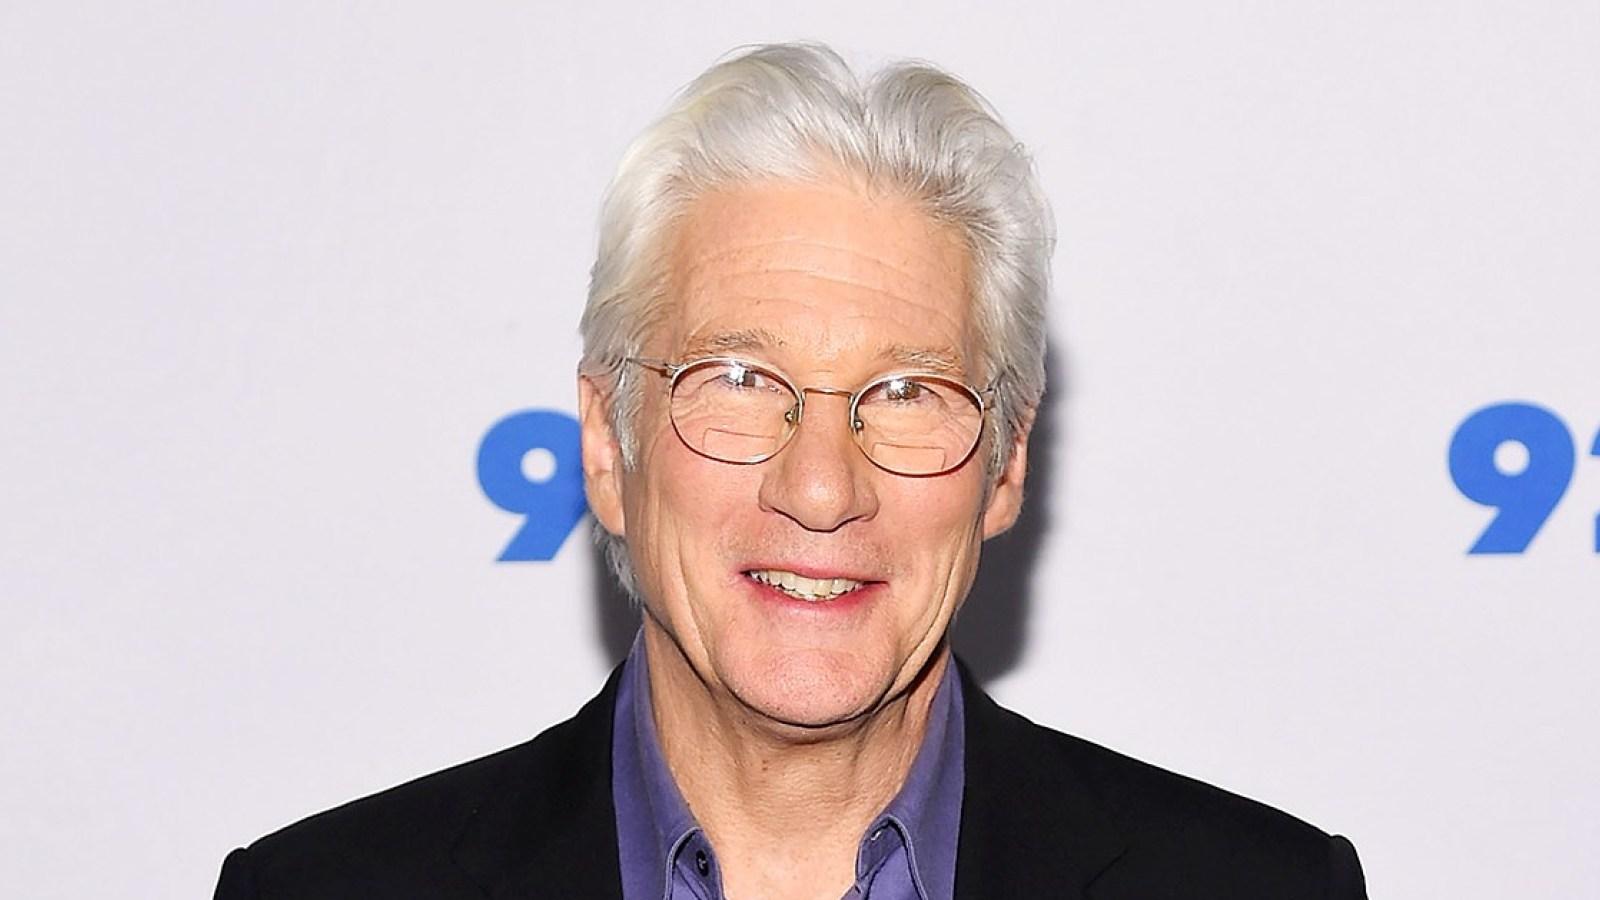 Richard Gere Reflects on His 'Hustler' Days and Insecurities